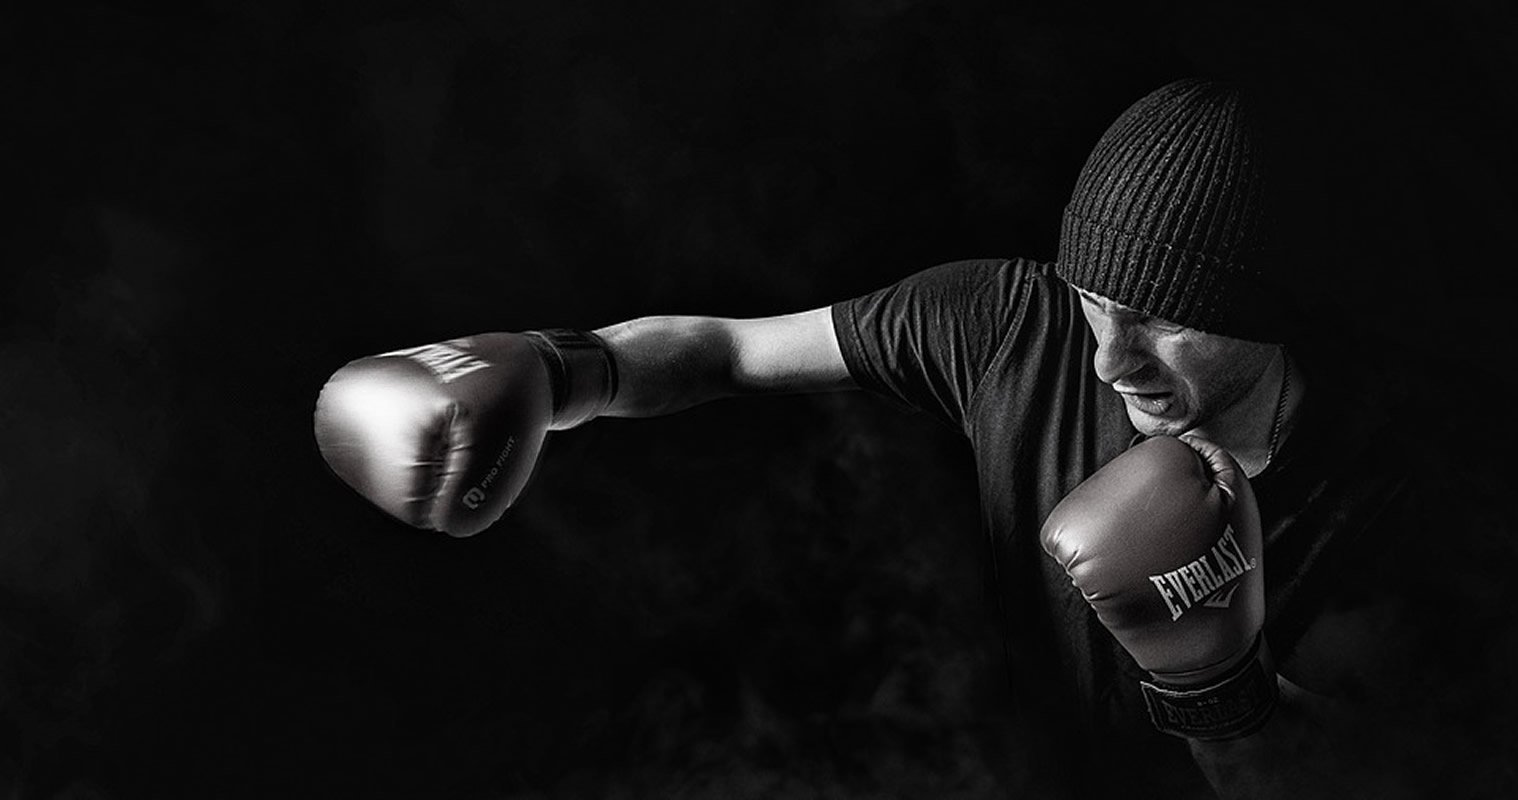 Routine sparring in boxing can affect brain performance – Episode 49